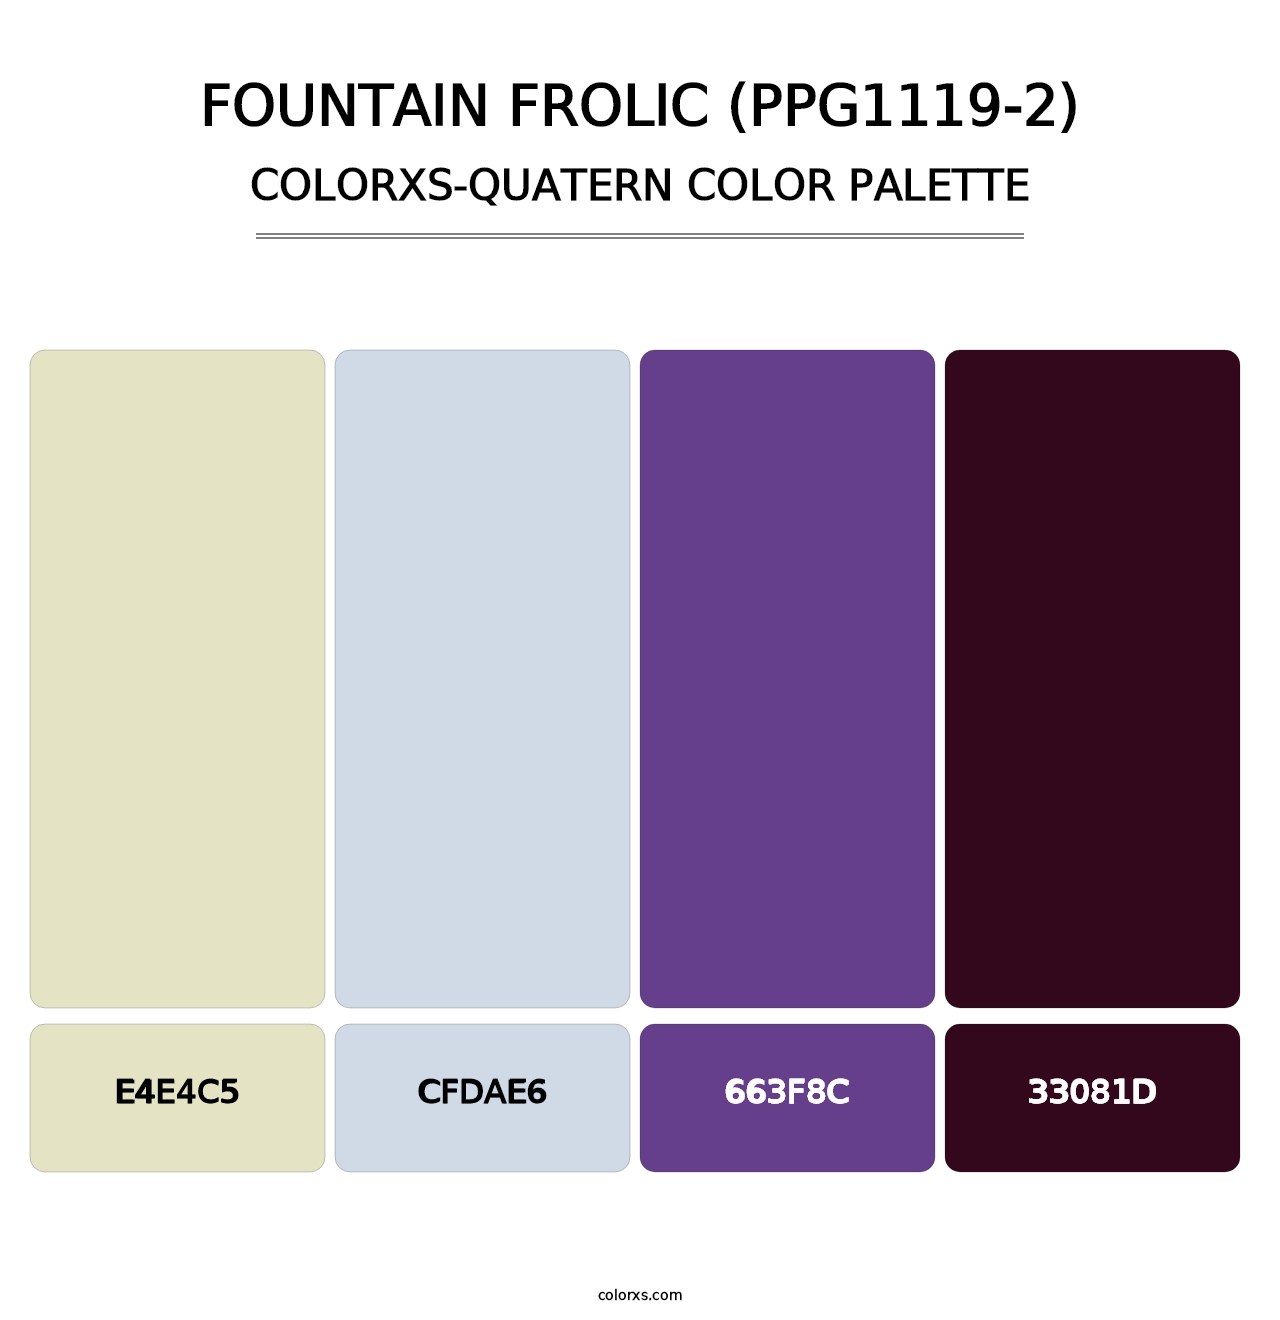 Fountain Frolic (PPG1119-2) - Colorxs Quatern Palette